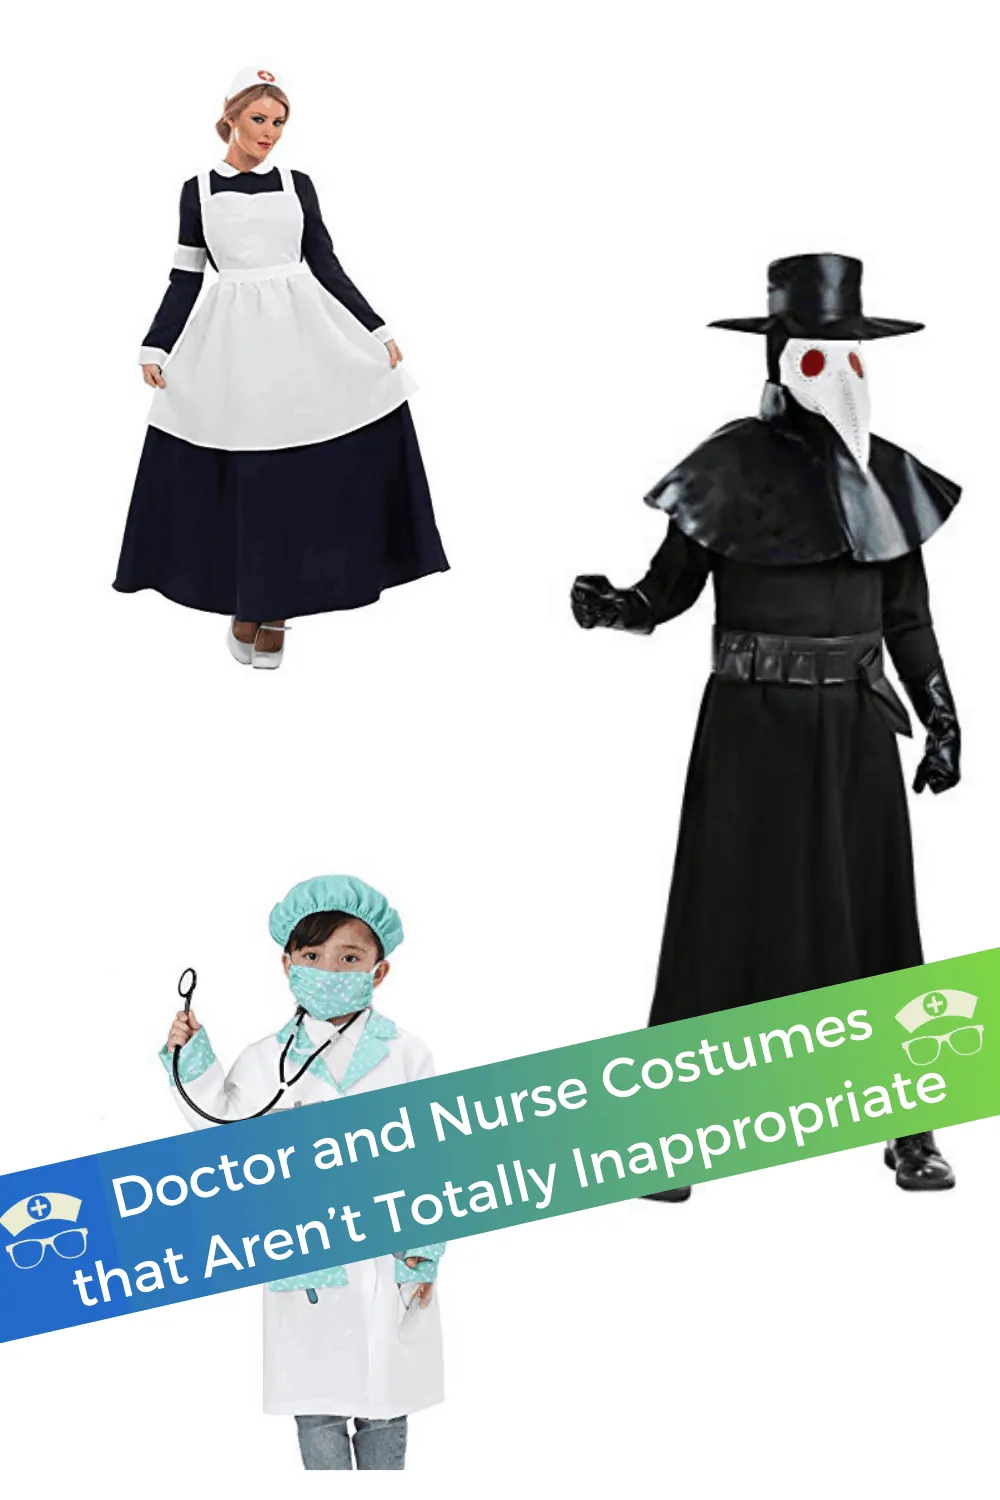 Doctor and Nurse Costumes that Aren’t Totally Inappropriate. These doctor and nurse costumes are fun, creative, modest, and appropriate. Browse ideas for both adults and children. #thenerdynurse #nurse #nurses #doctor #Halloween #costume #nursecostume #doctorcostume